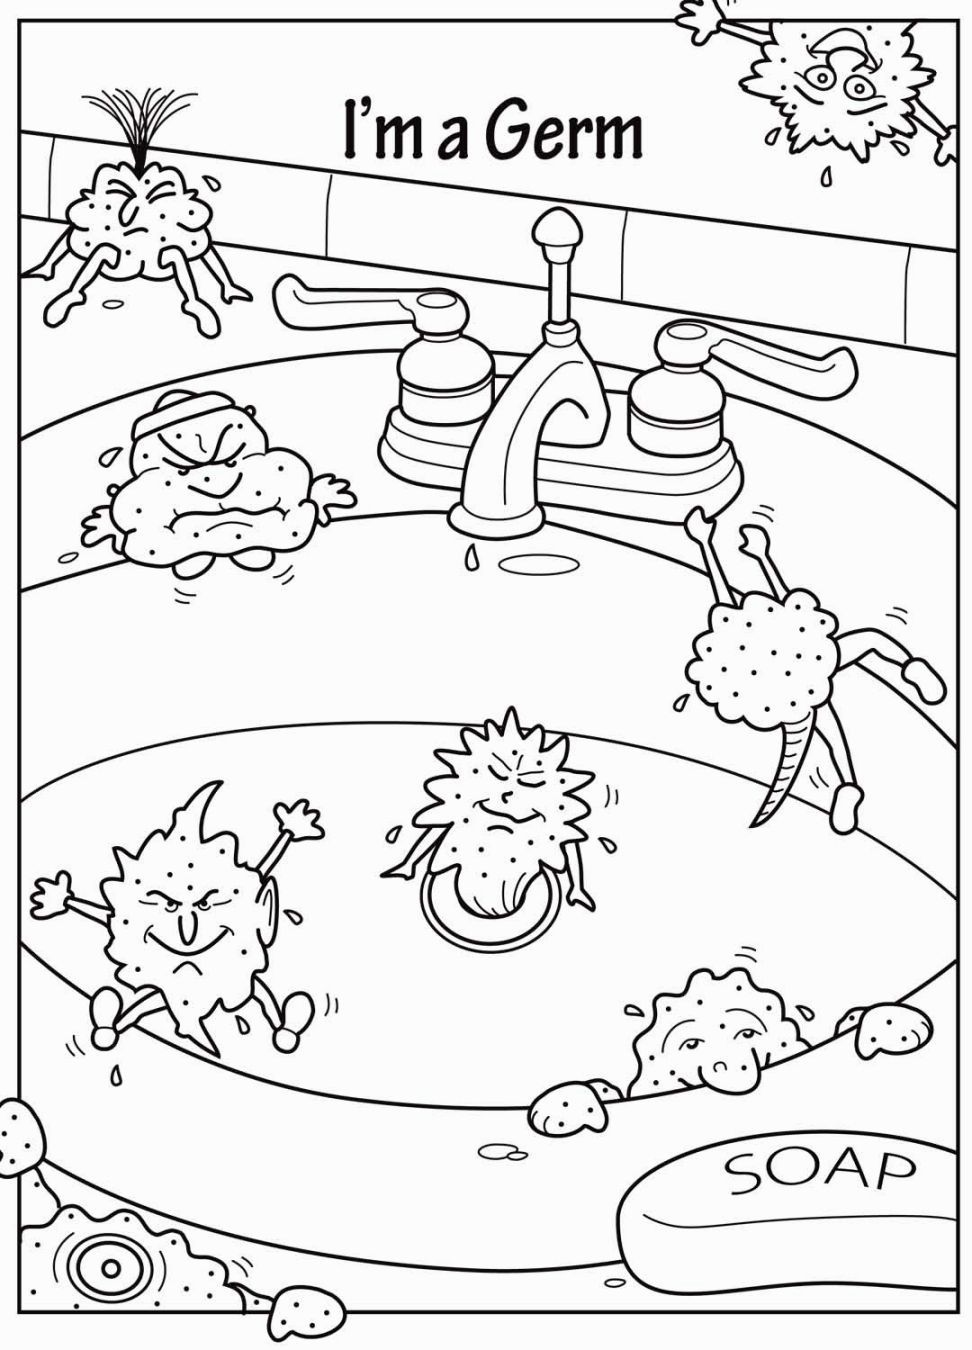 Germ Coloring Page Germs Preschool Hygiene Lessons Coloring Pages